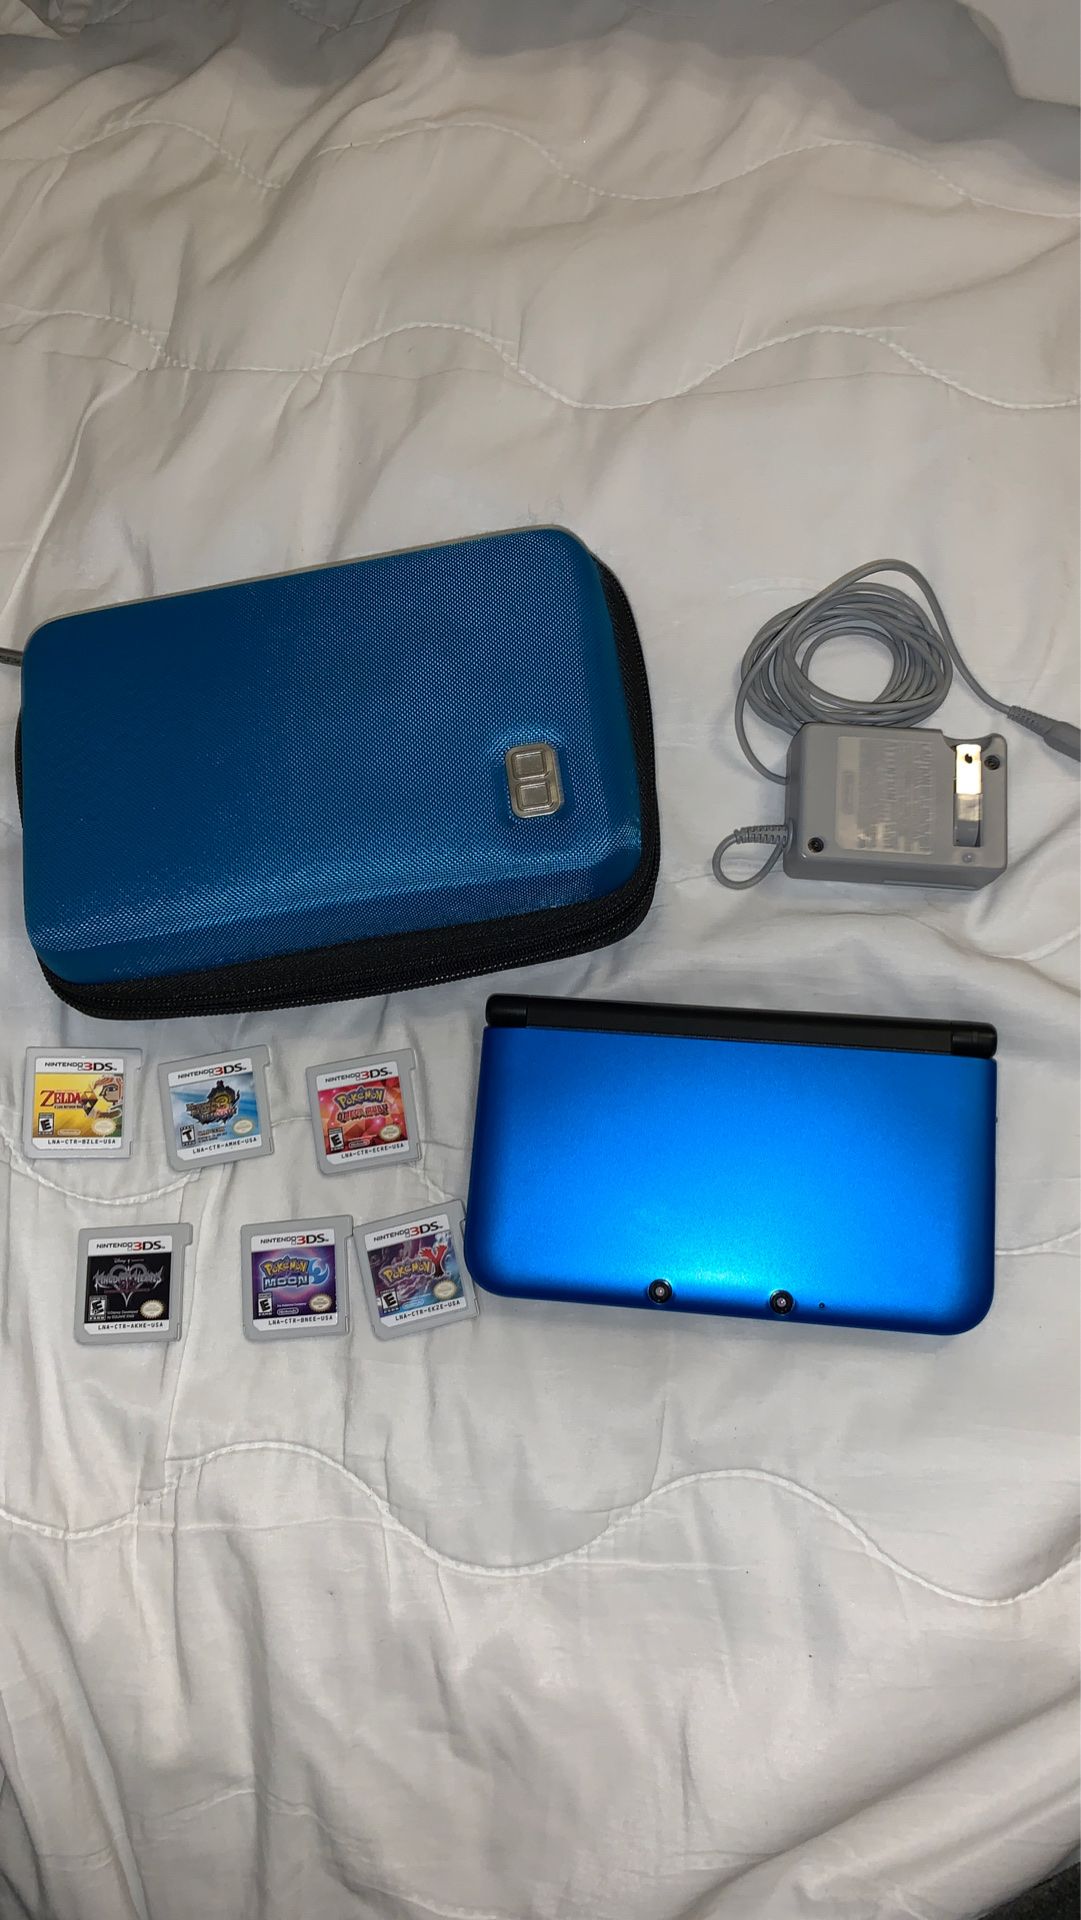 Nintendo 3DS XL with charger, case and games